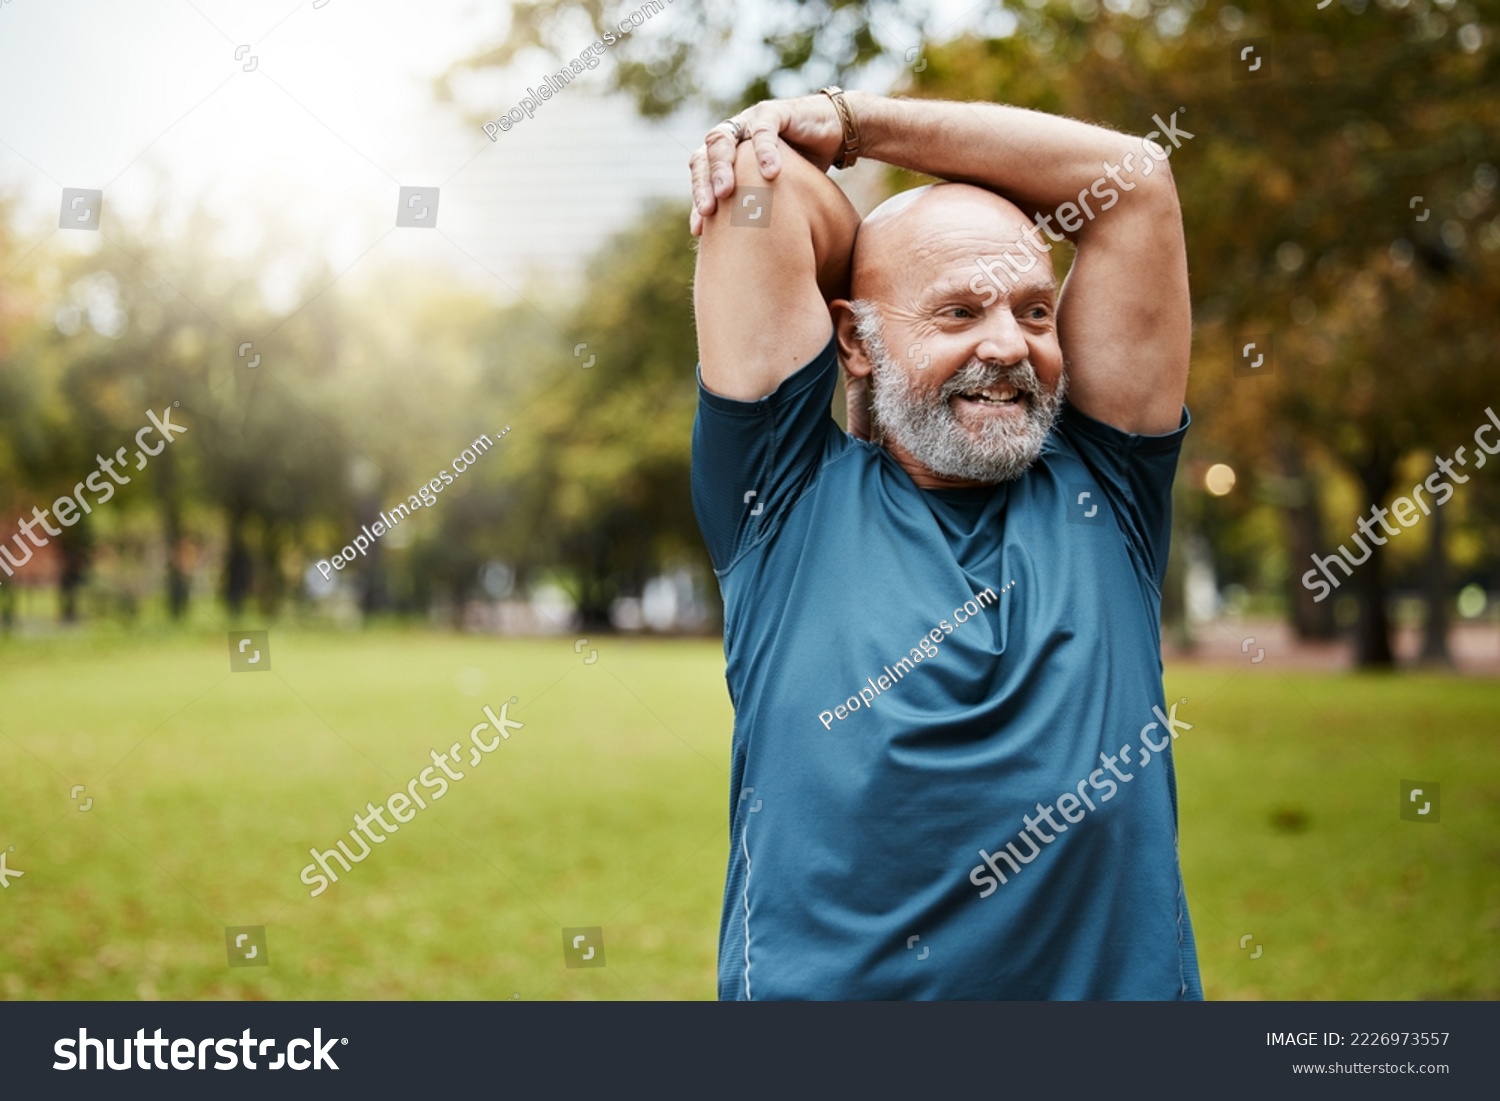 Stretching, fitness and running with old man in park for health, workout or sports with mockup. Warm up, retirement and exercise with senior runner in nature for training, jogger and cardio endurance #2226973557